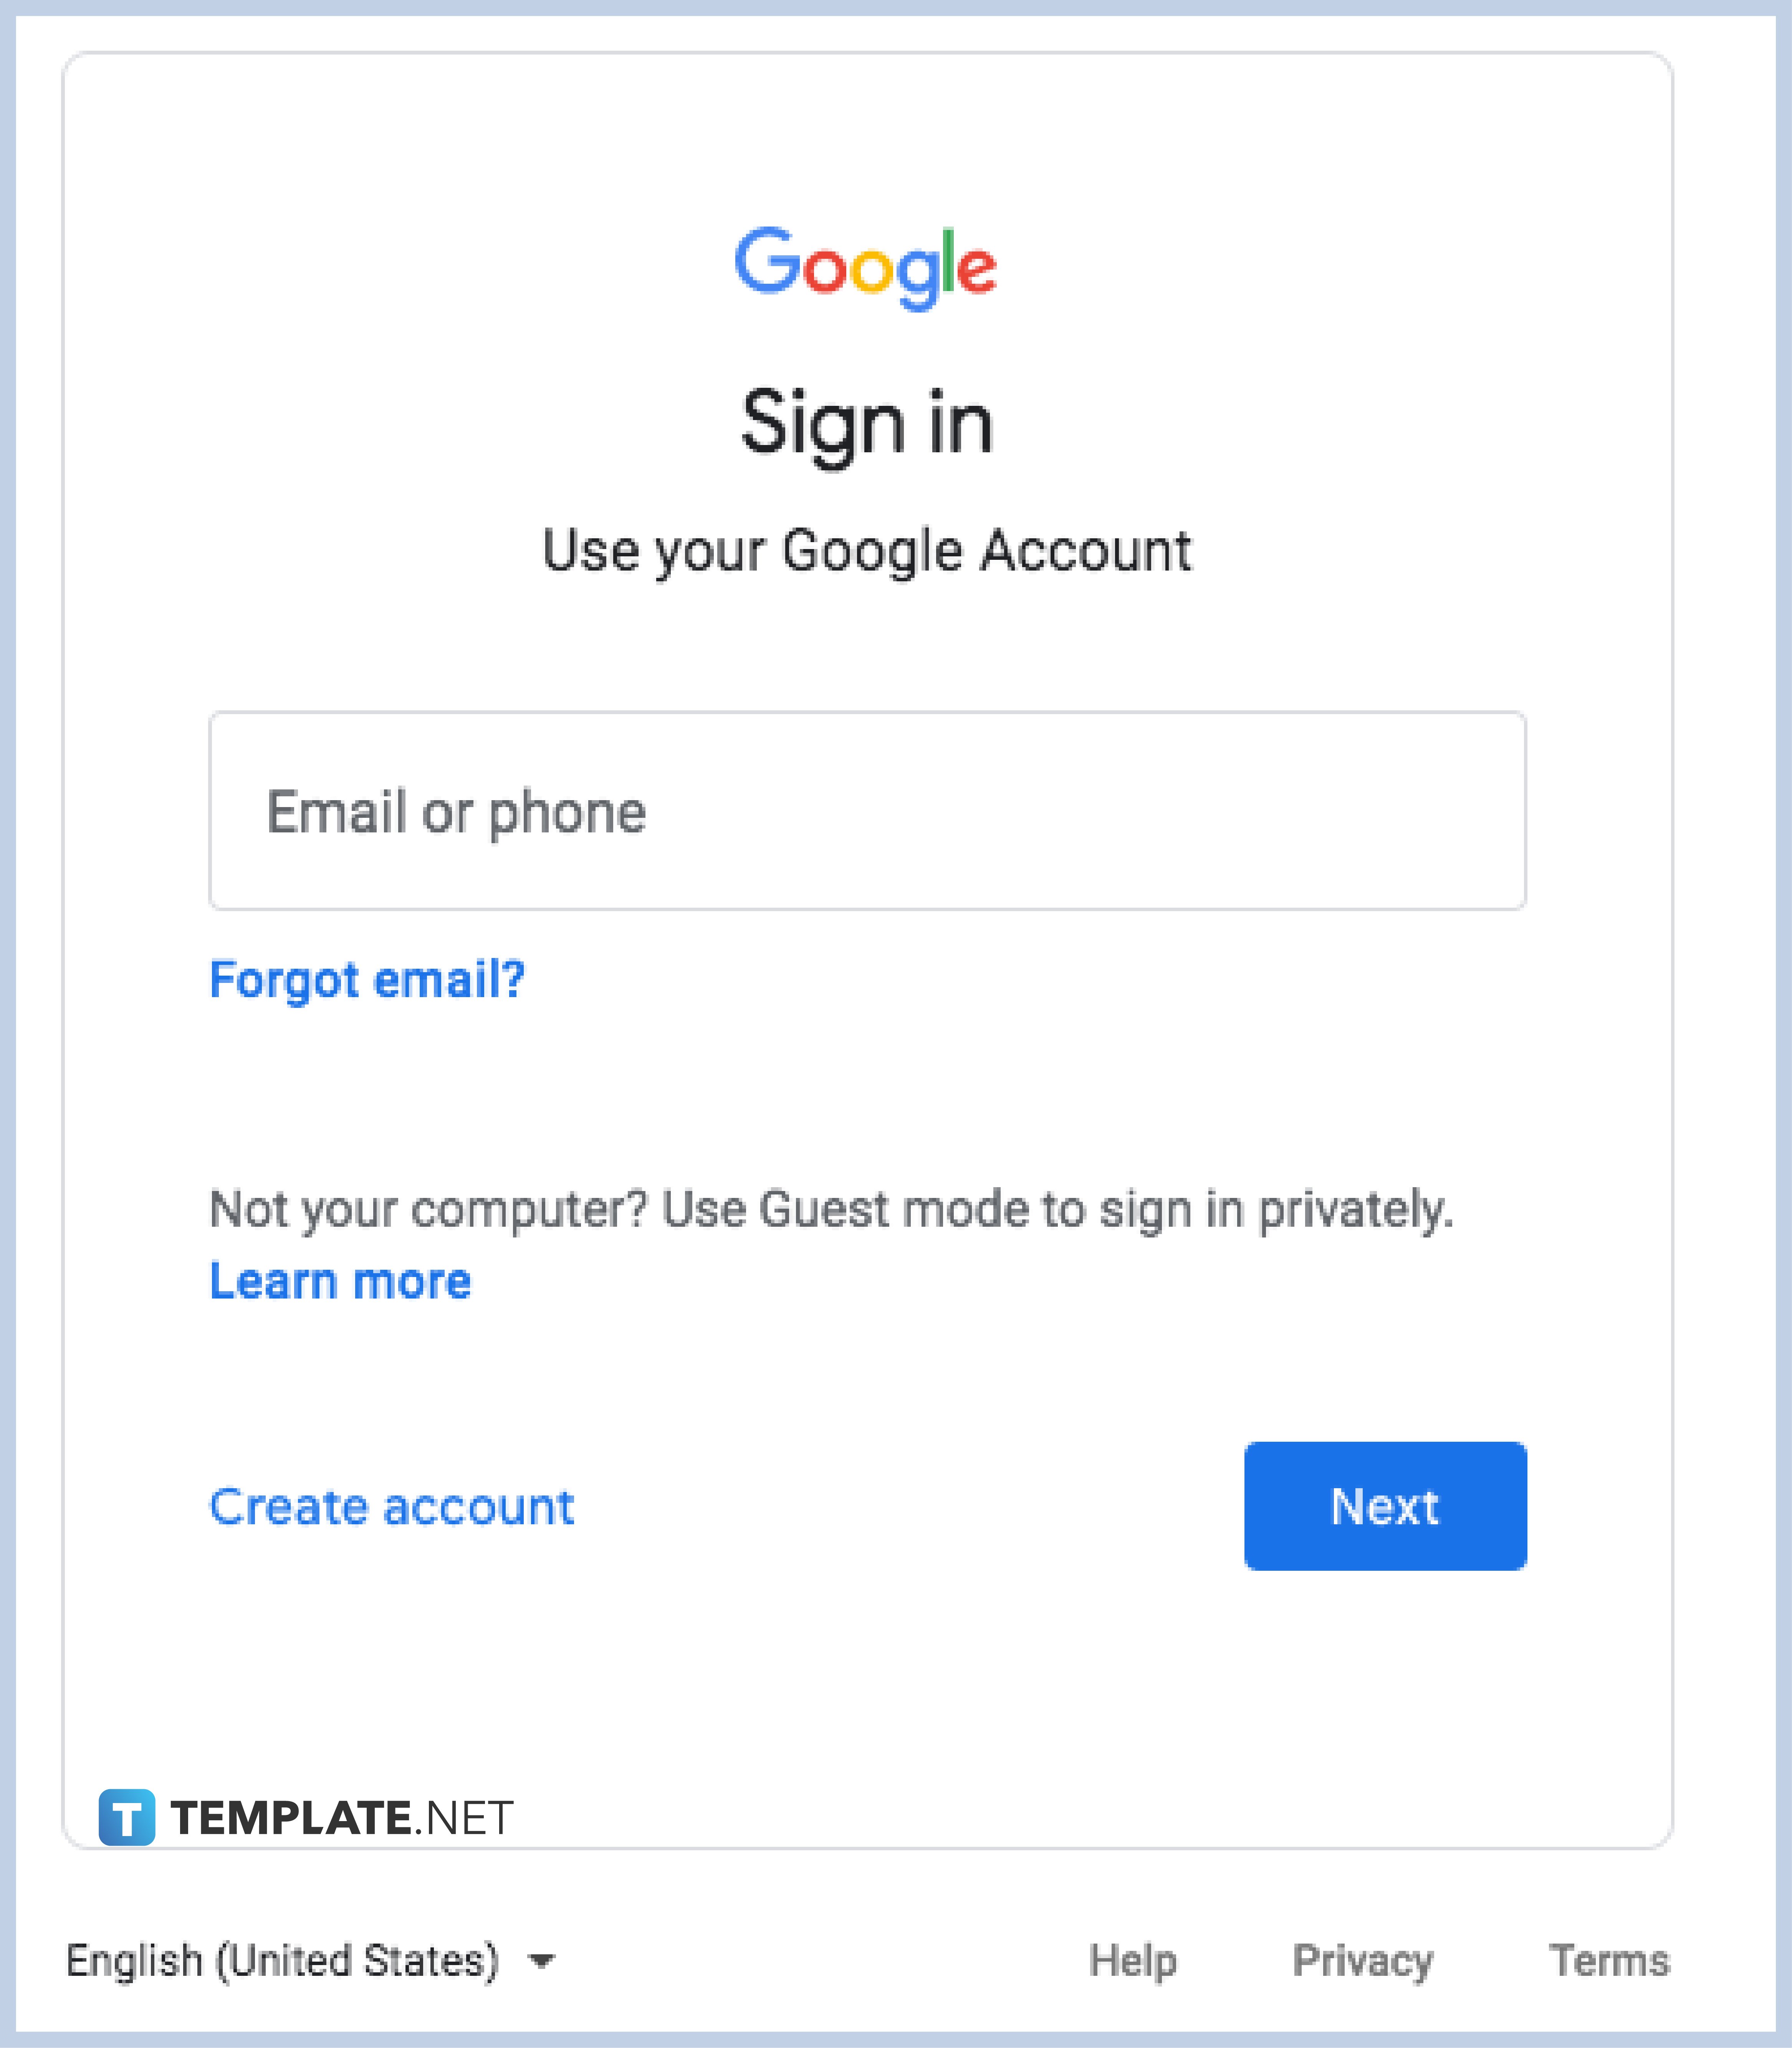 step-1-sign-in-with-your-google-classroom-account-01